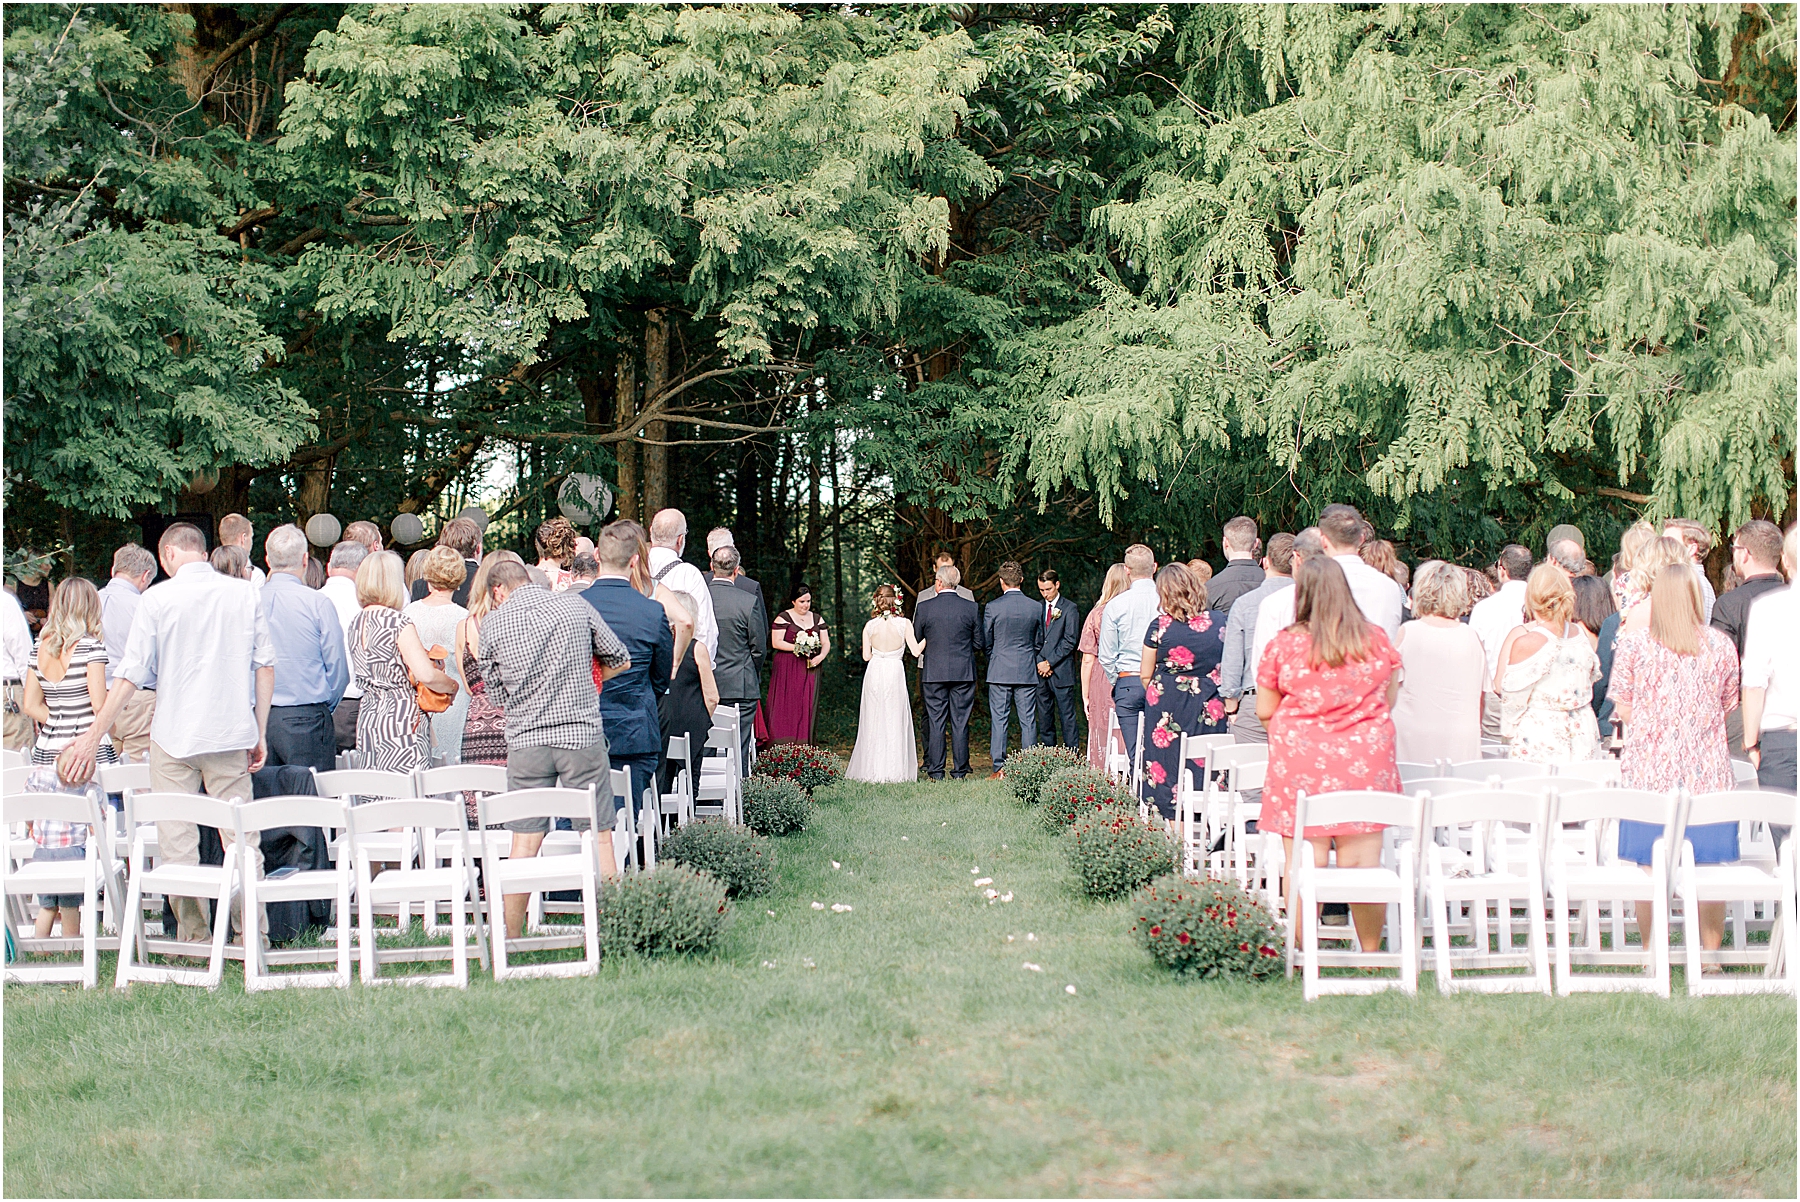 whimsical wedding under the trees